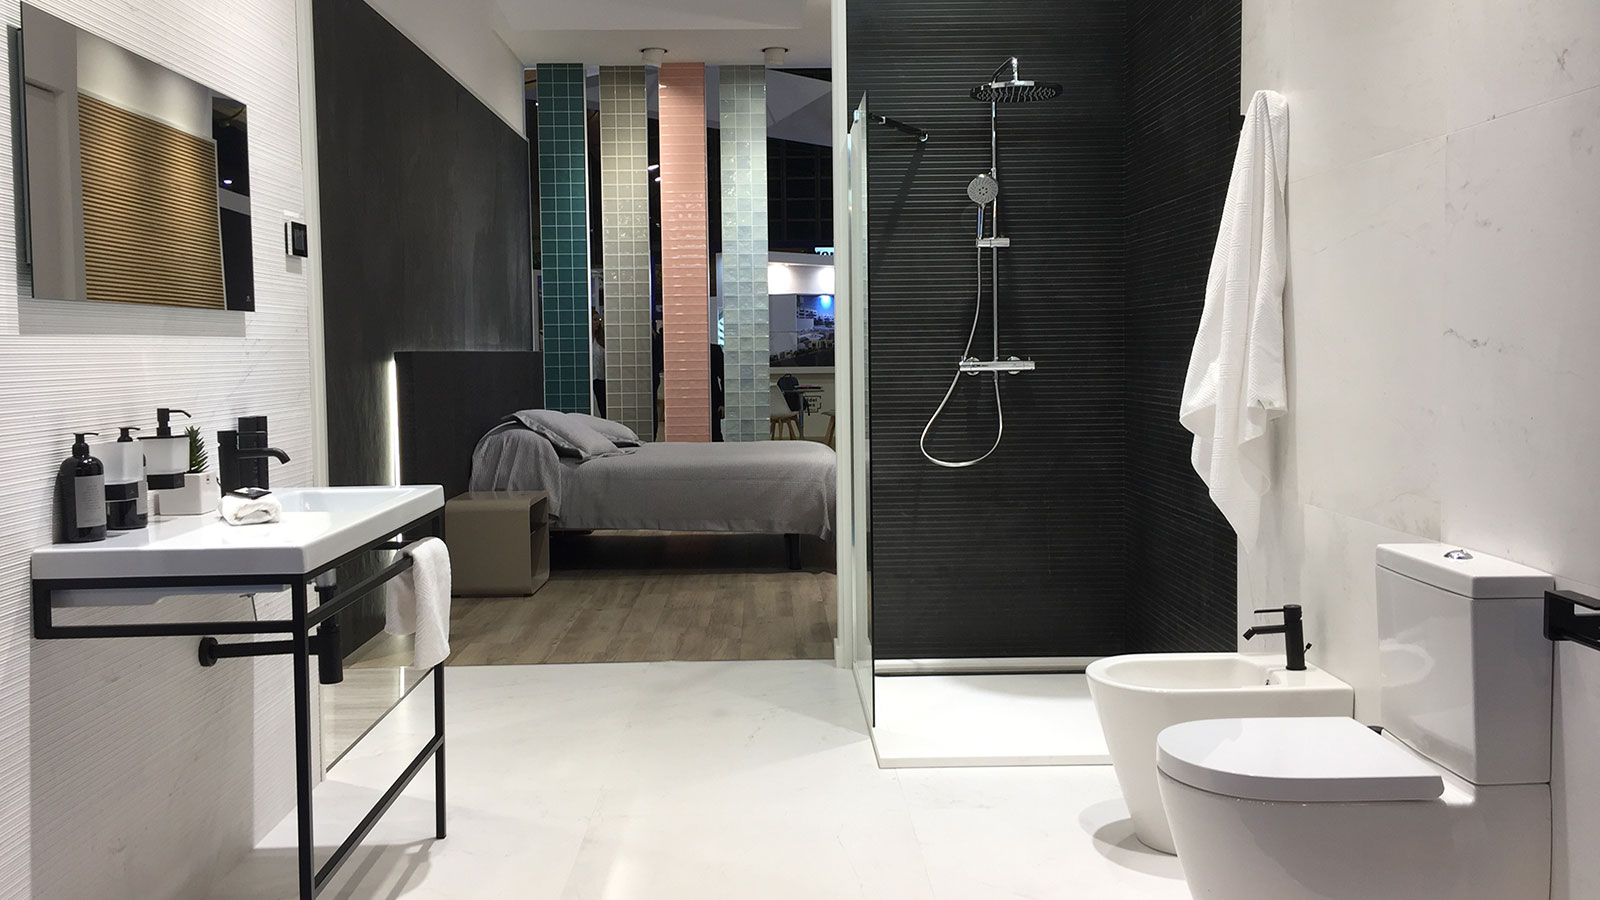 The PORCELANOSA Grupo strengthens its national presence at the Mediterranean Real Estate Exhibition in Málaga